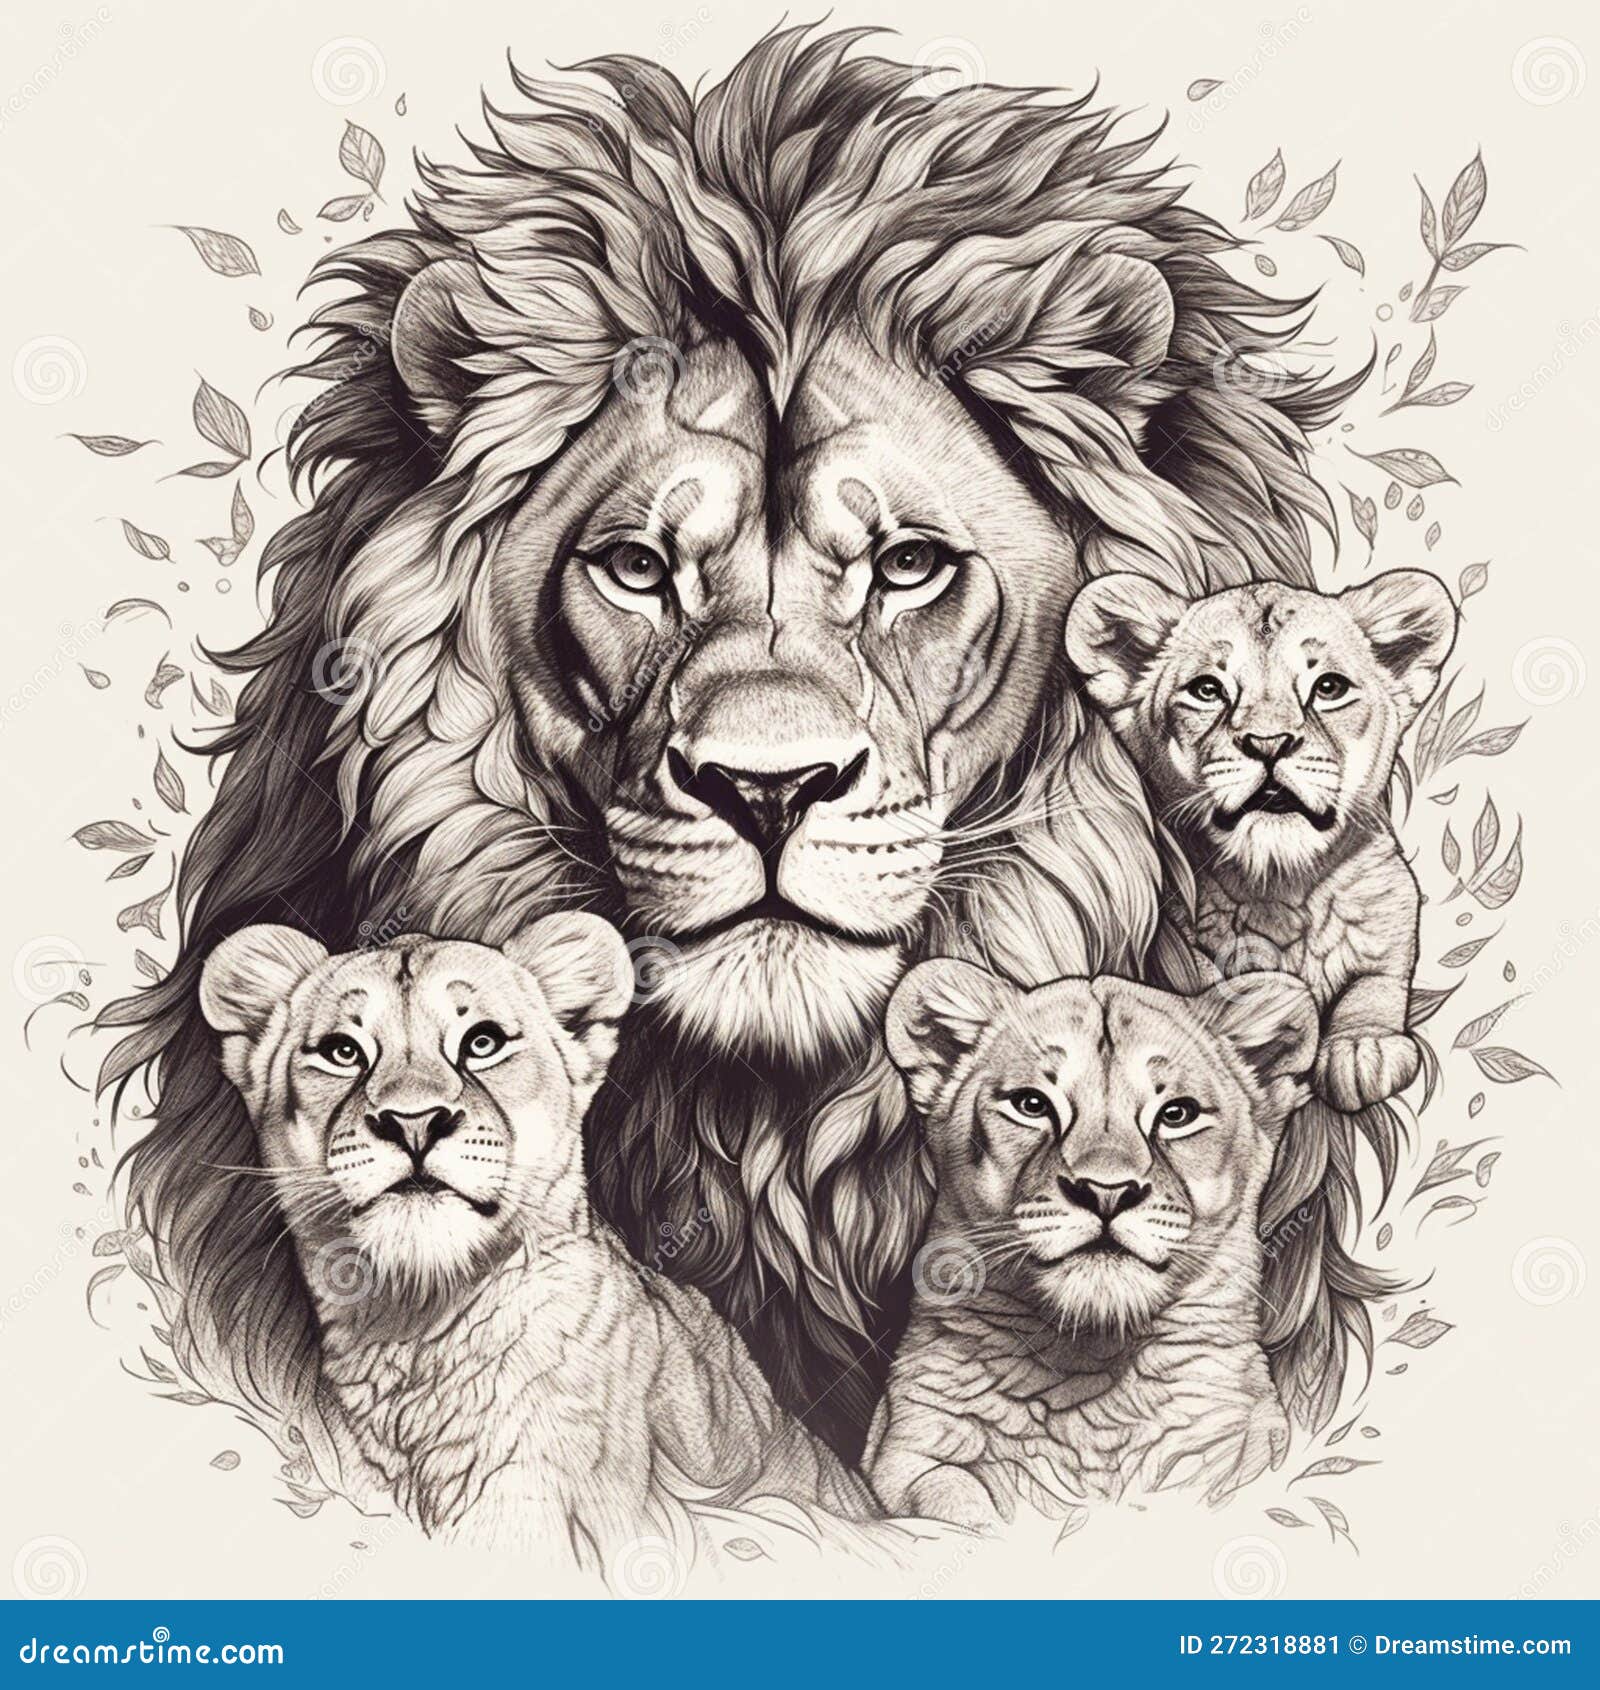 How To Draw A Lion Cub | Step By Step - YouTube